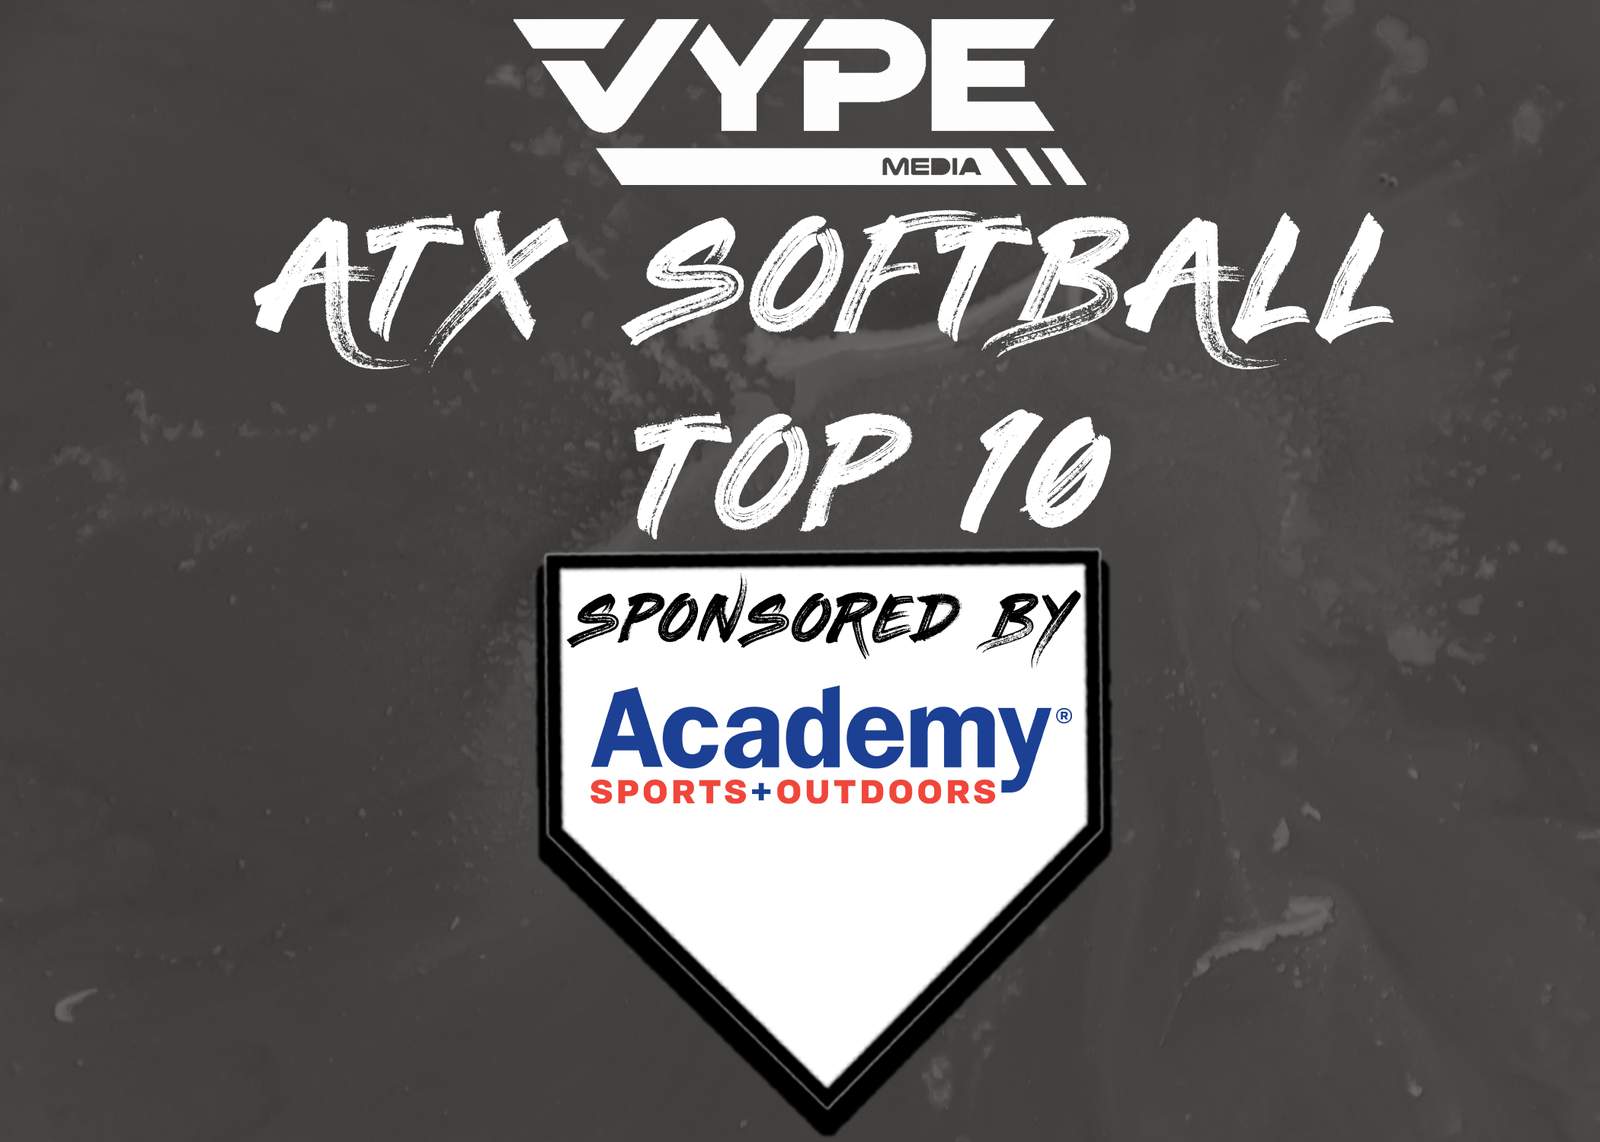 VYPE Austin Softball Rankings: Week of 4/5/21 presented by Academy Sports + Outdoors